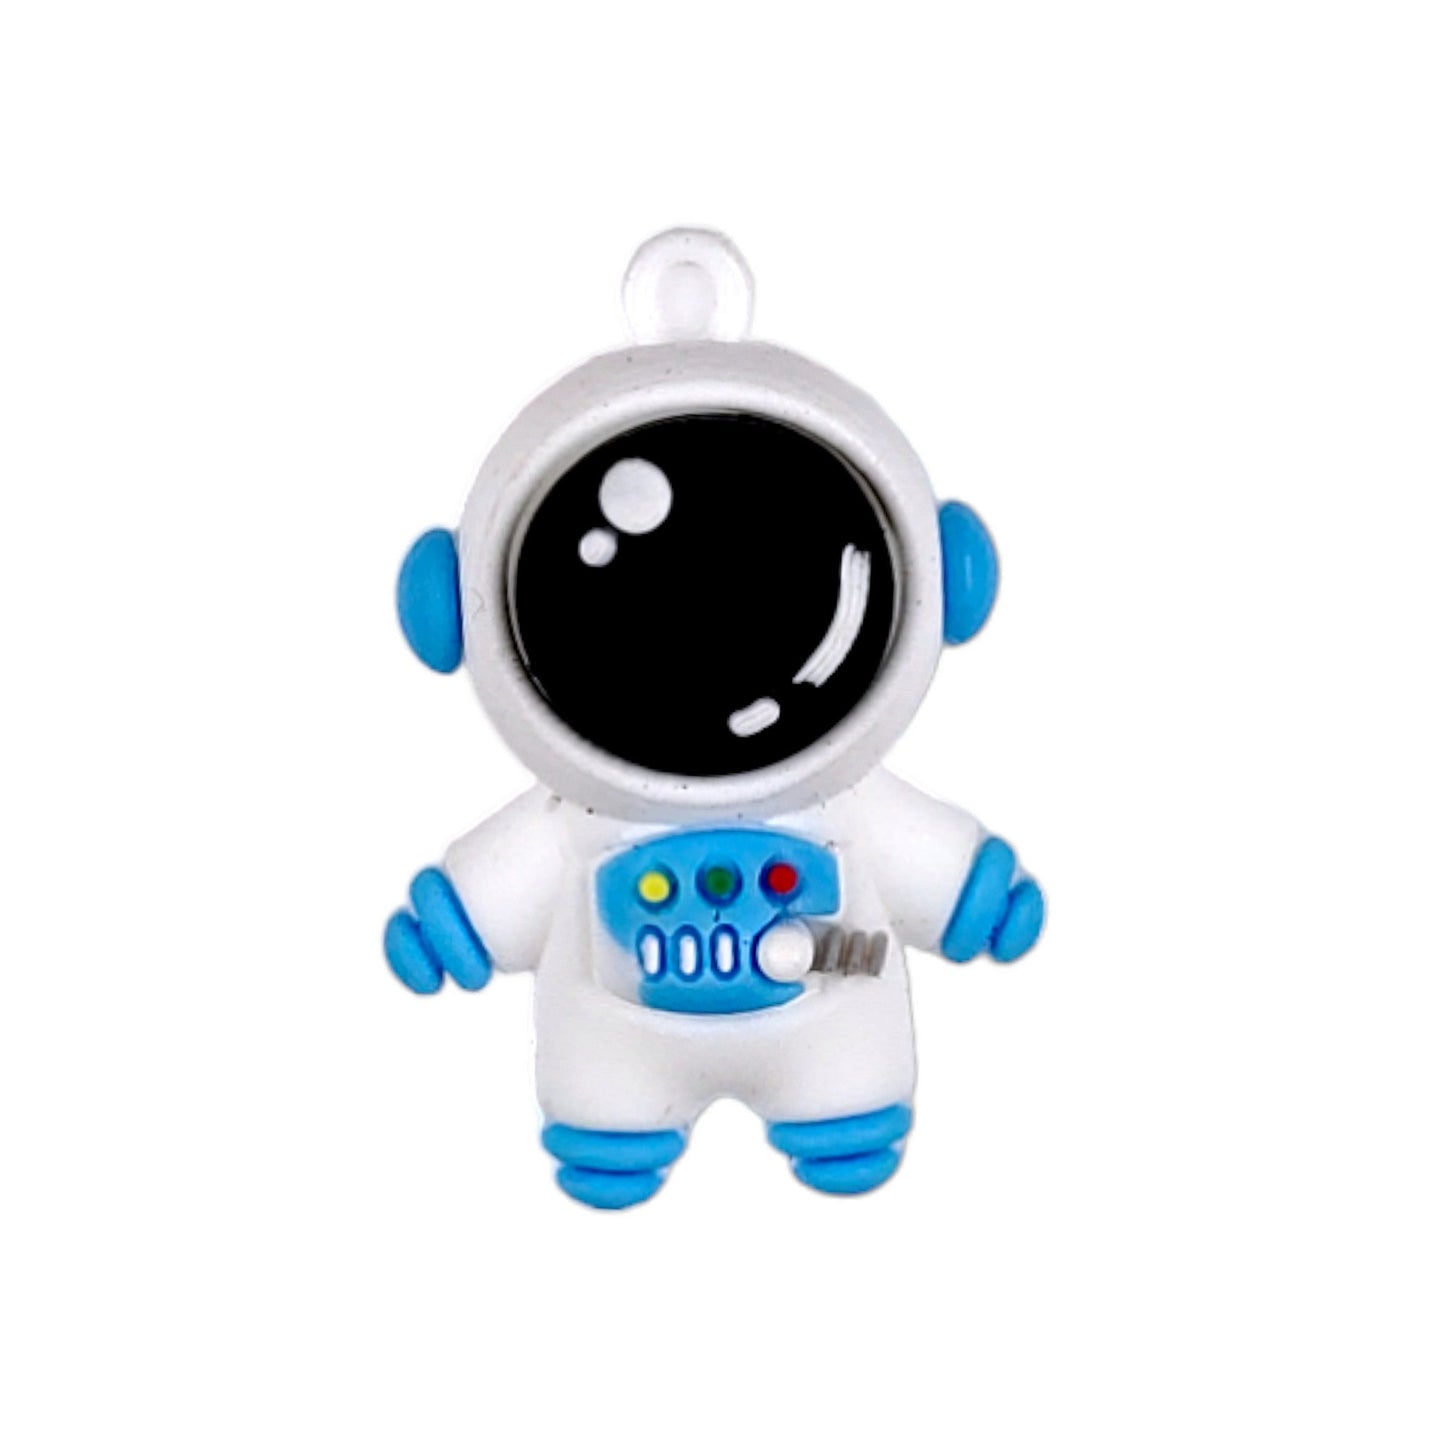 Astronaut Doll Resin Motif For Craft Design Or Decoration, 25 Pcs,White-13530